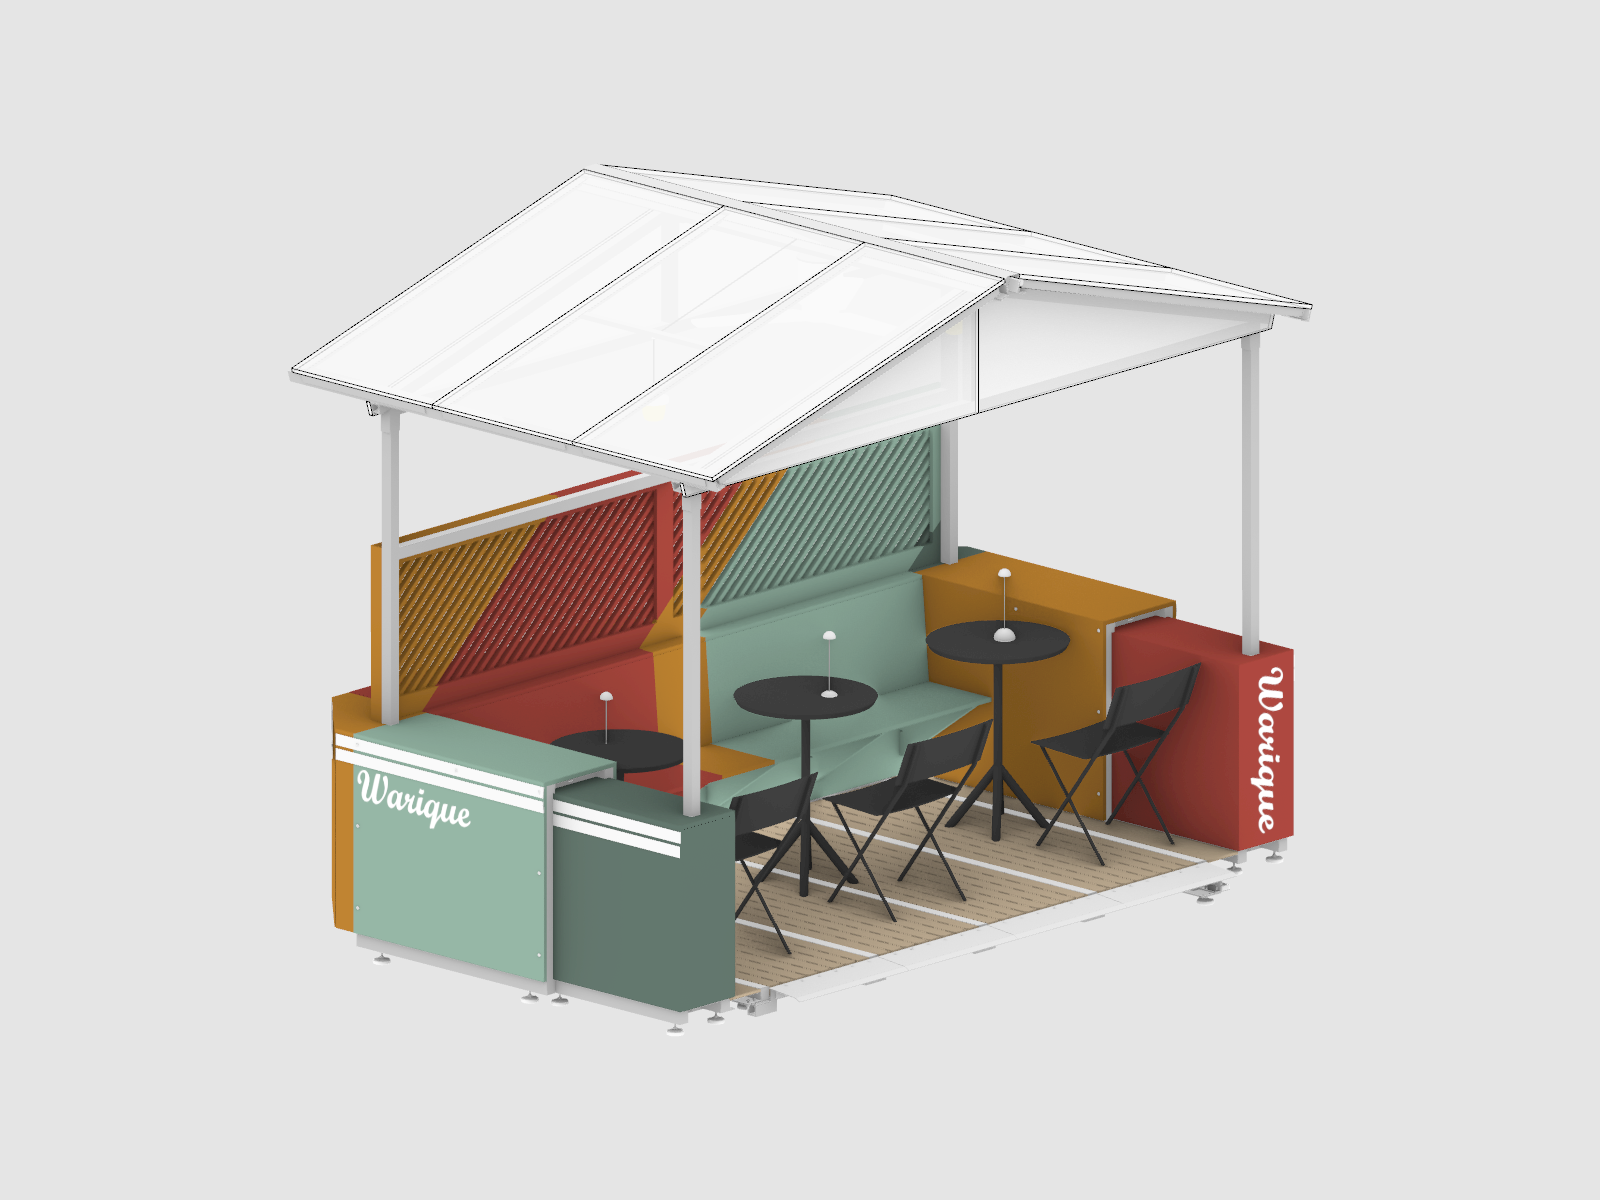 diagram of a small roadway dining setup with three sides made of barriers, a covering, and tables and chairs